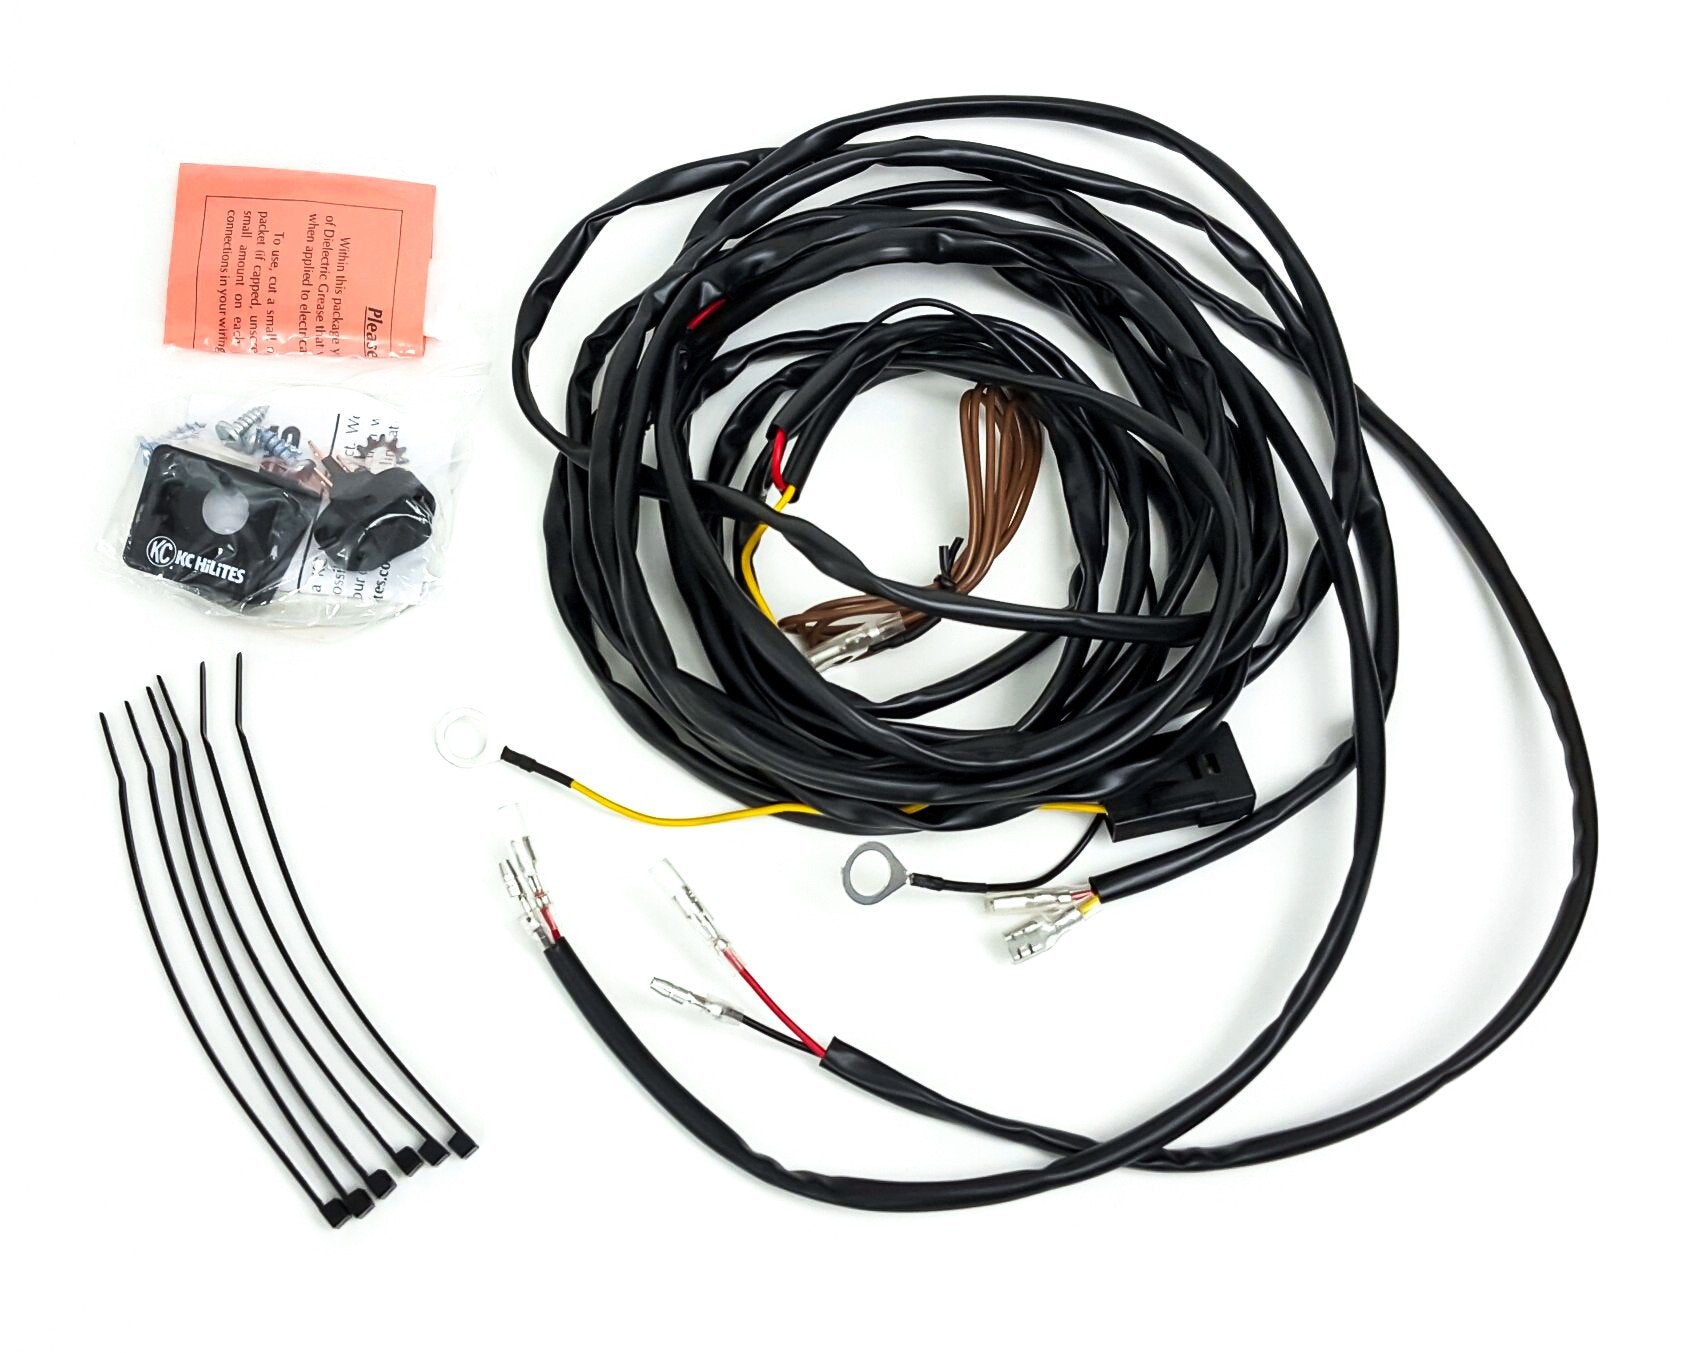 UNIVERSAL WIRING HARNESS FOR 2 CYCLONE LED LIGHTS - #63082